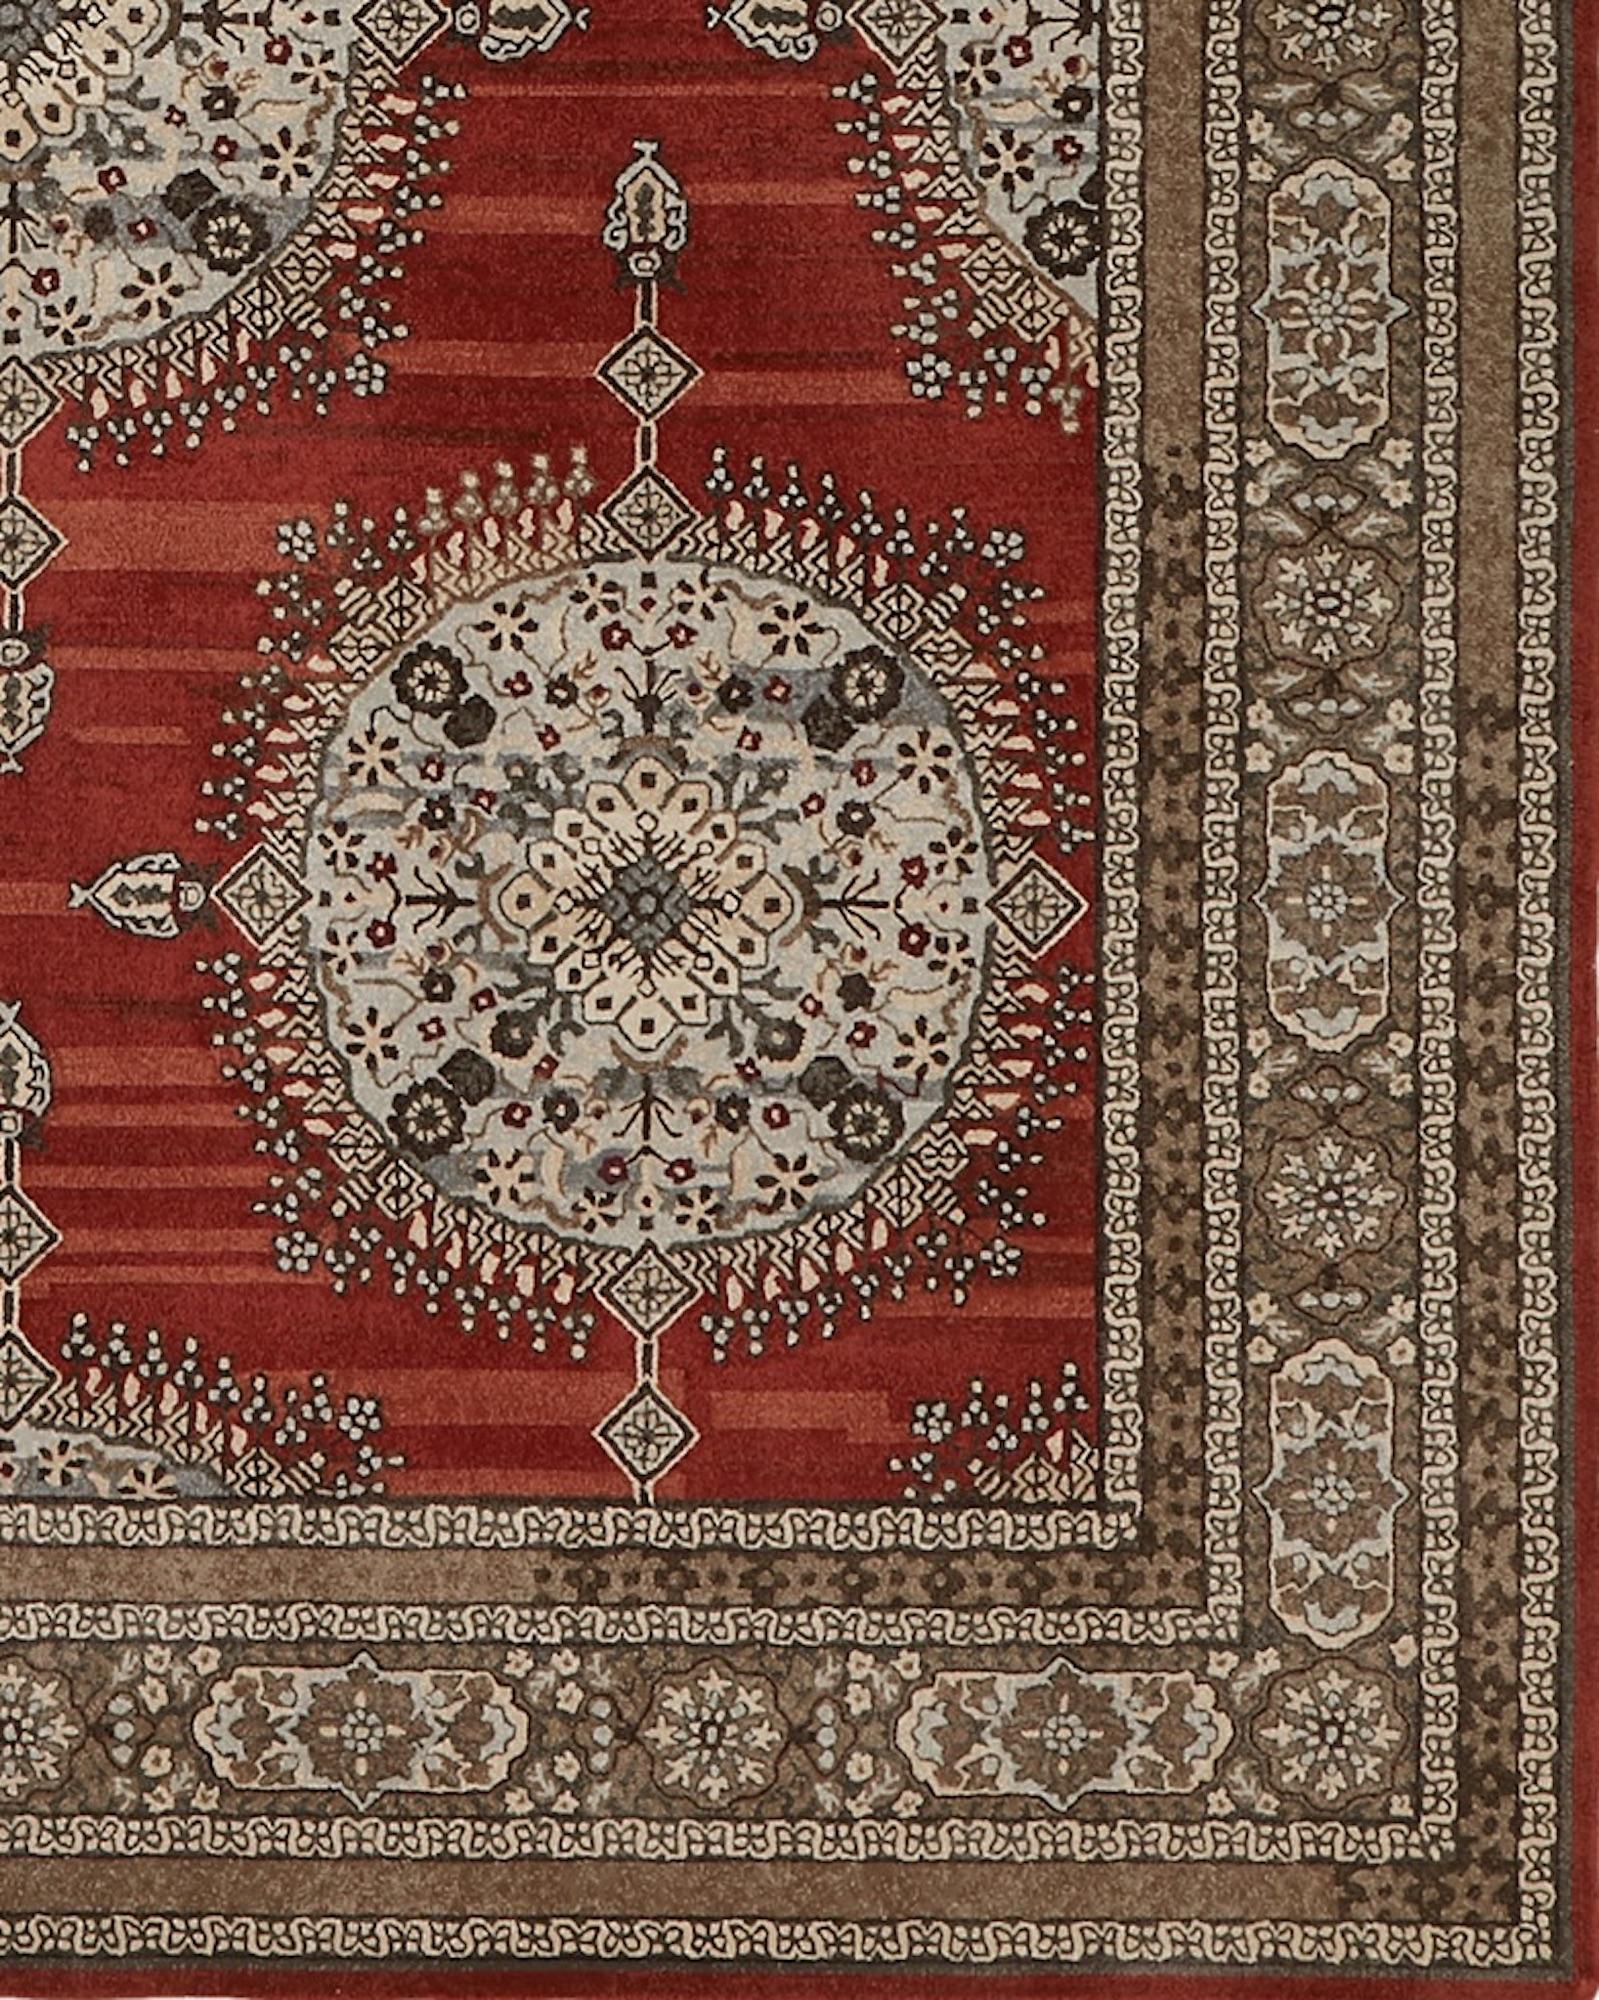 Chinese Schumacher Amritsar Area Rug in Hand-Tufted Wool by Patterson Flynn Martin